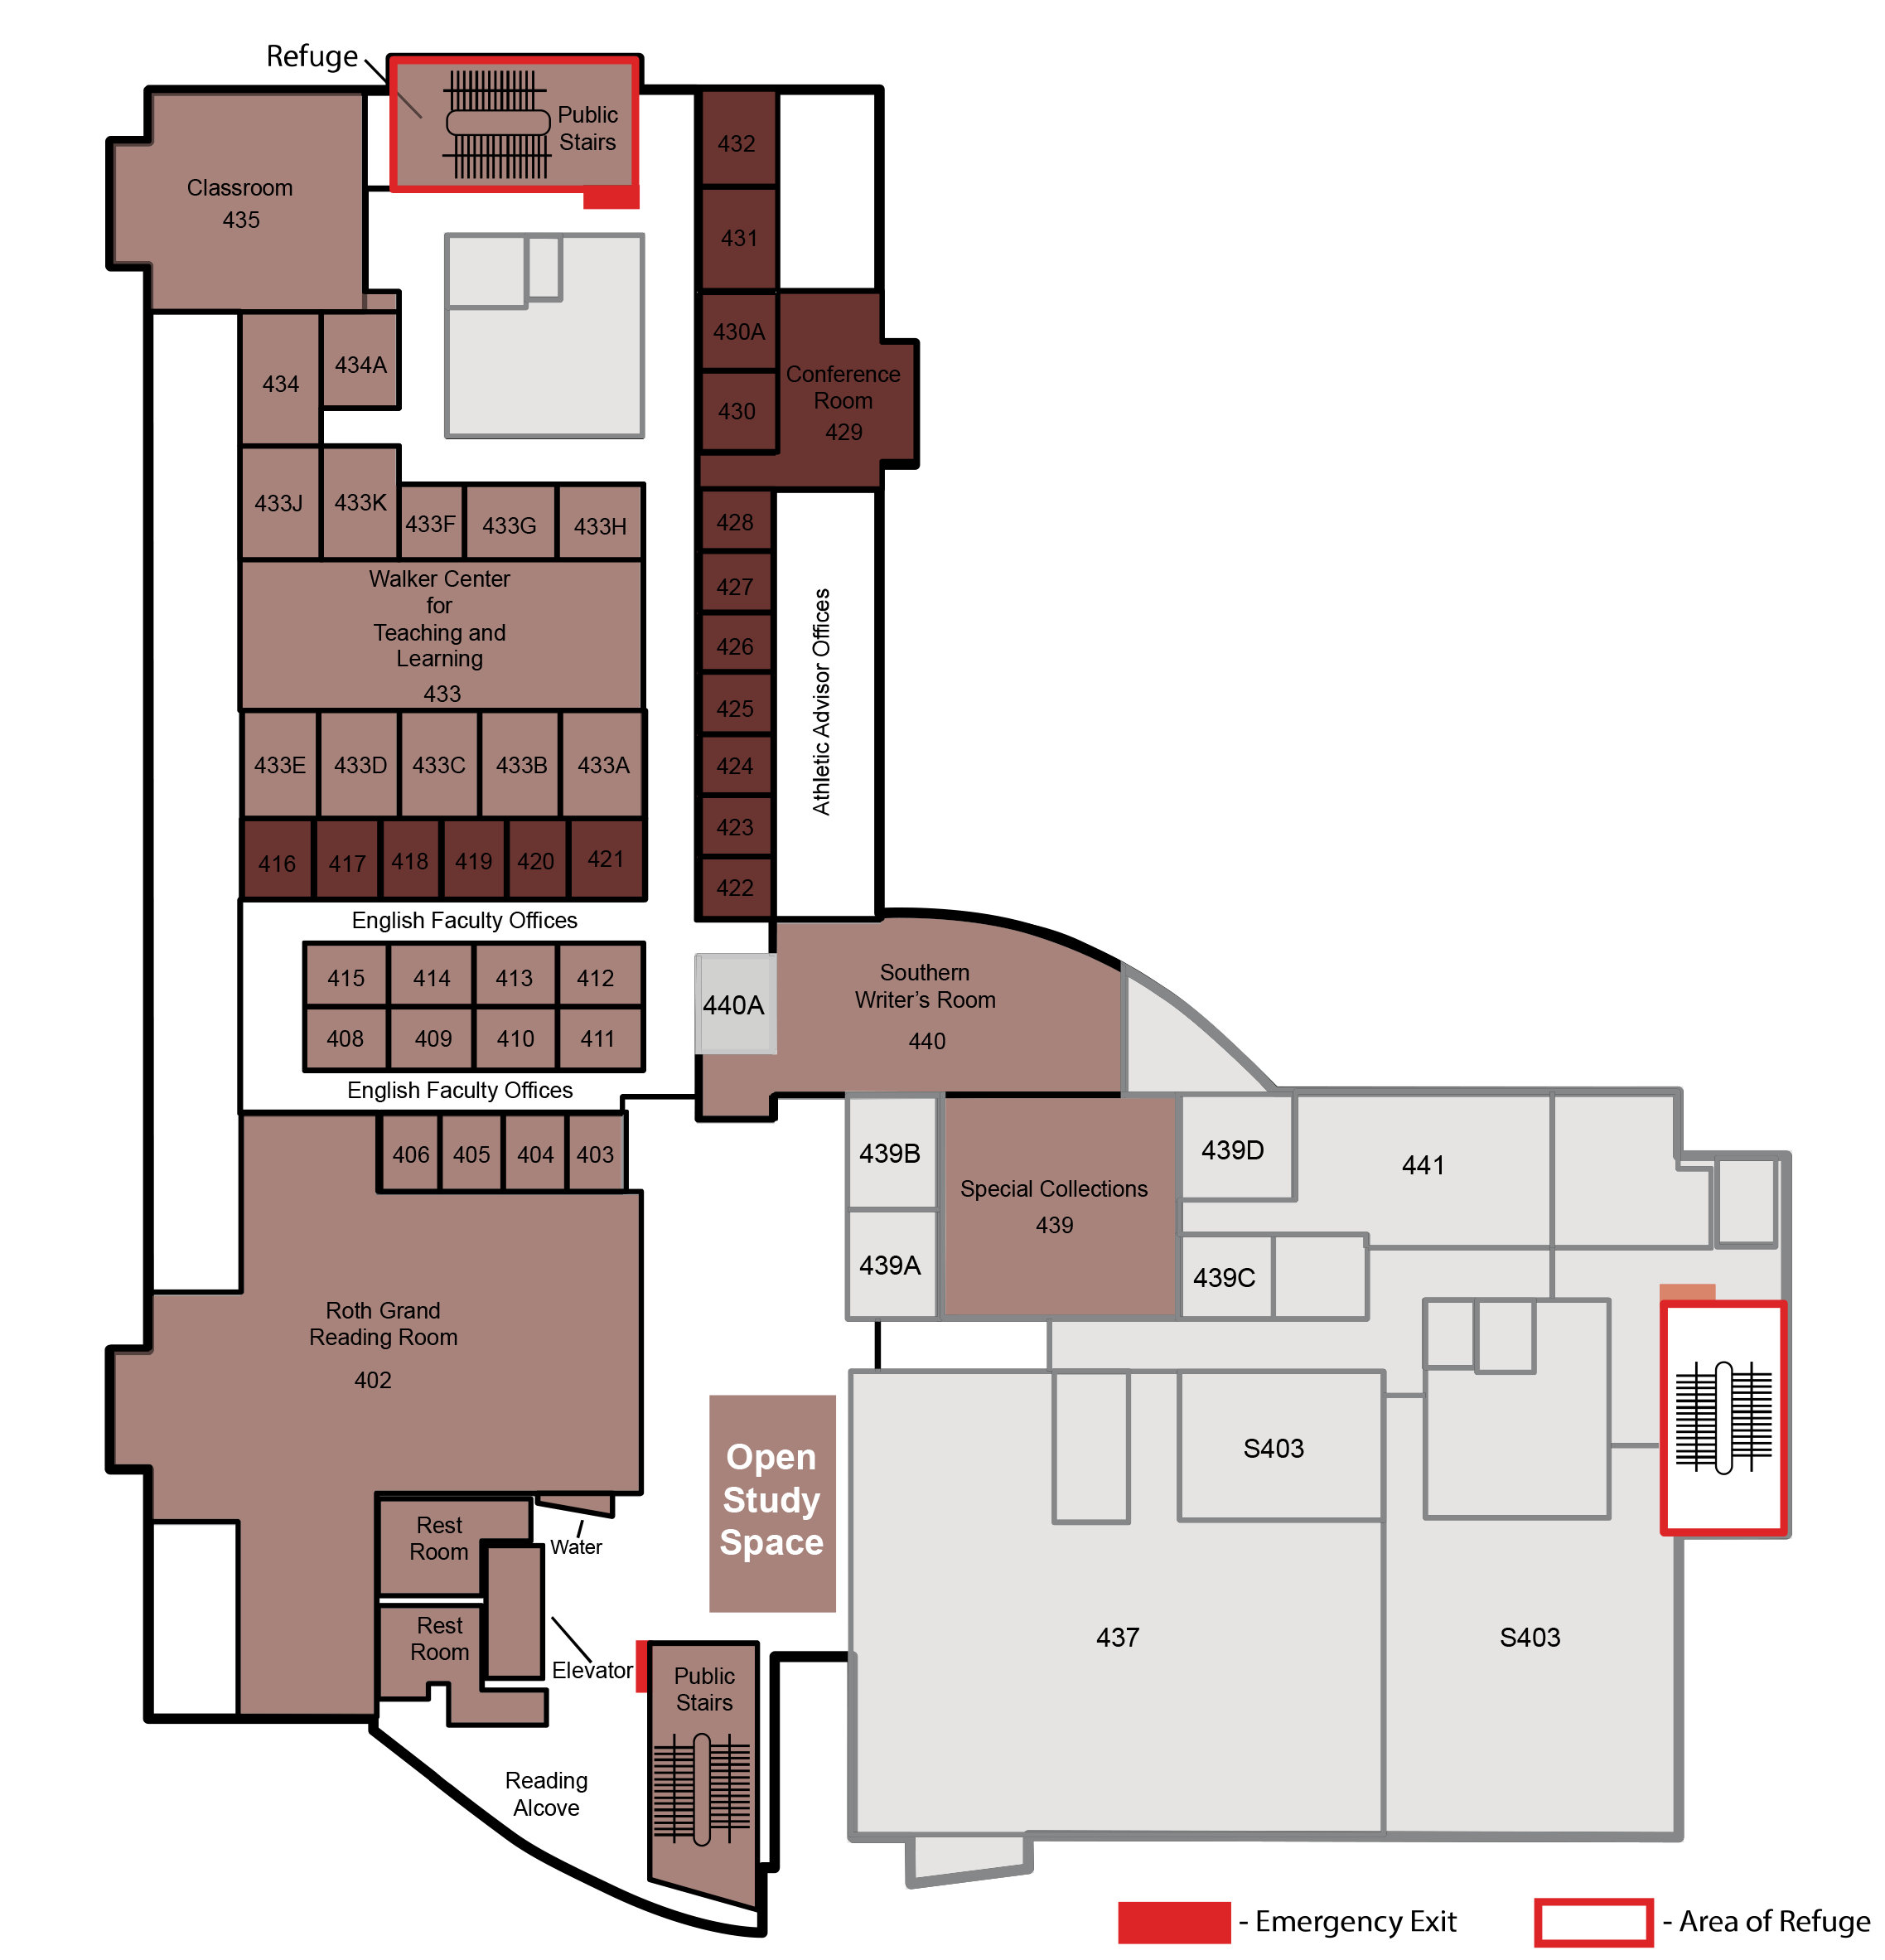 A map of the fourth floor of the library